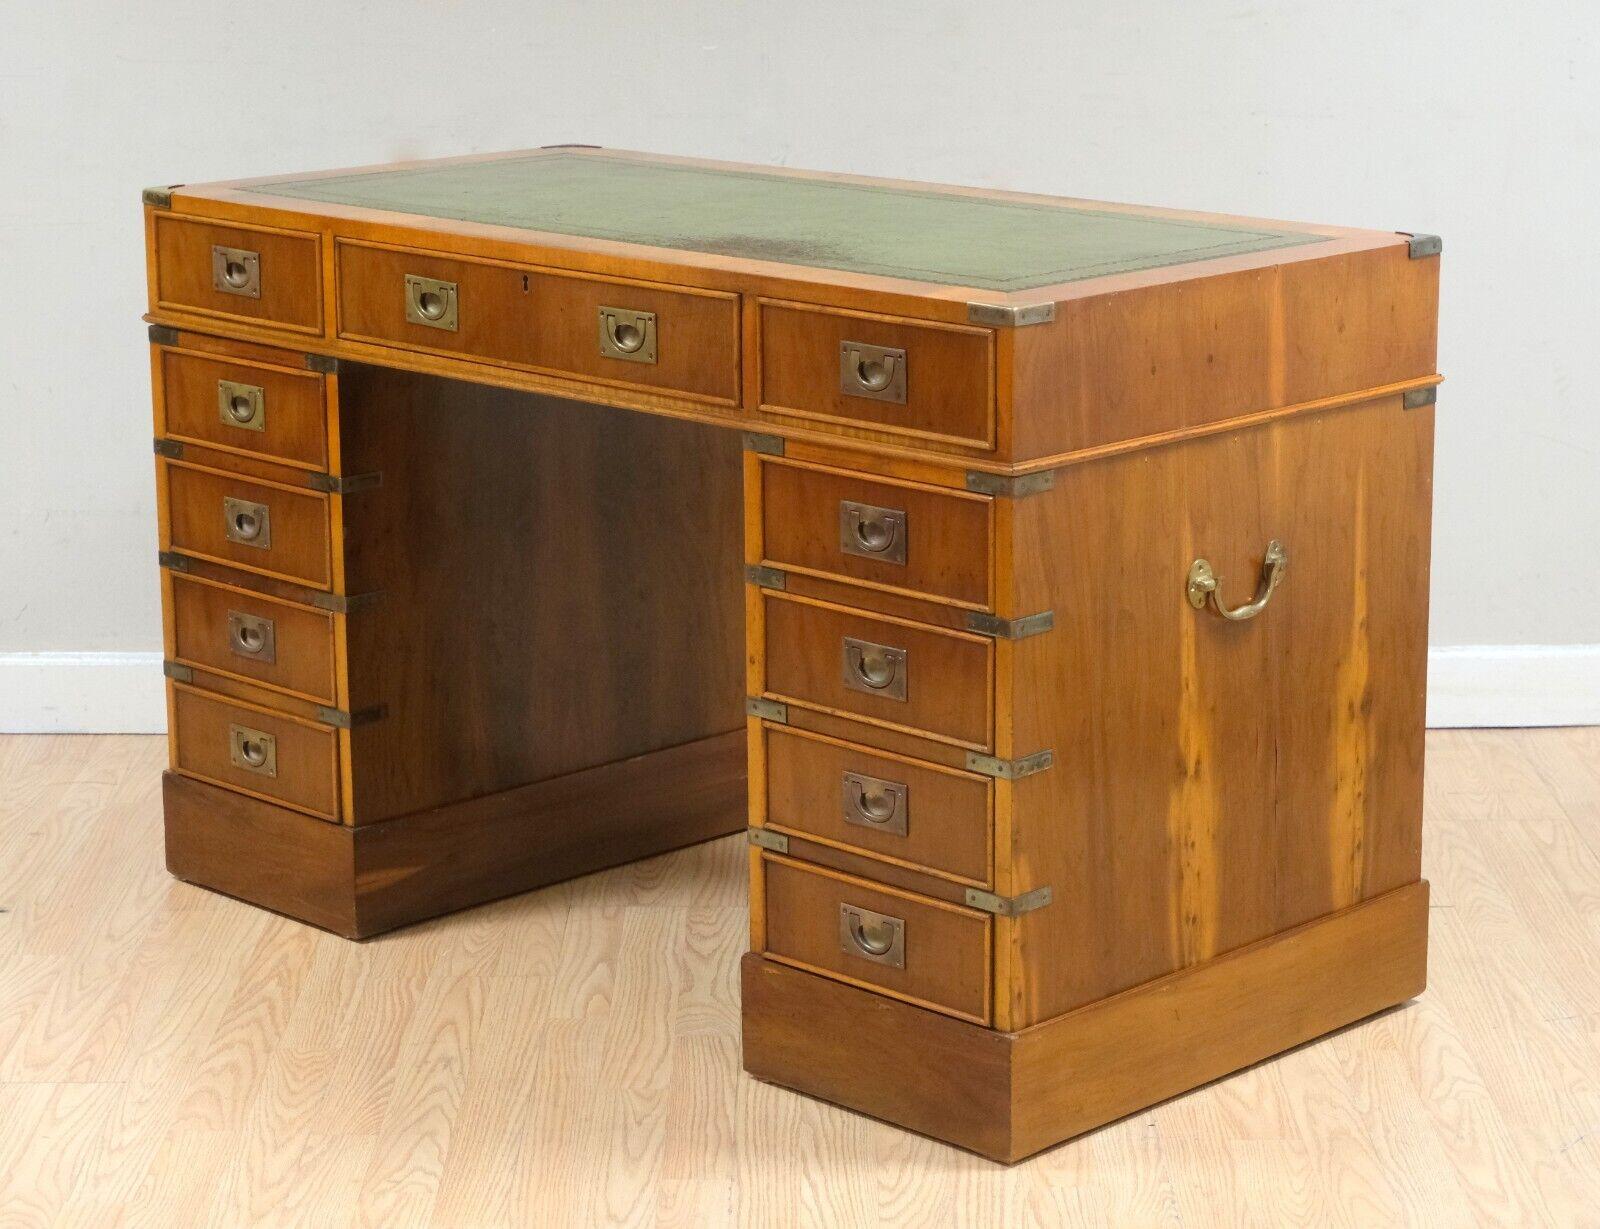 We are delighted to offer for sale this lovely Vintage 19th C Military campaign partner pedestal desk with green leather top.

This pedestal partner desk is a lovely design with great proportions from any angle. It is quite unusual in the sense